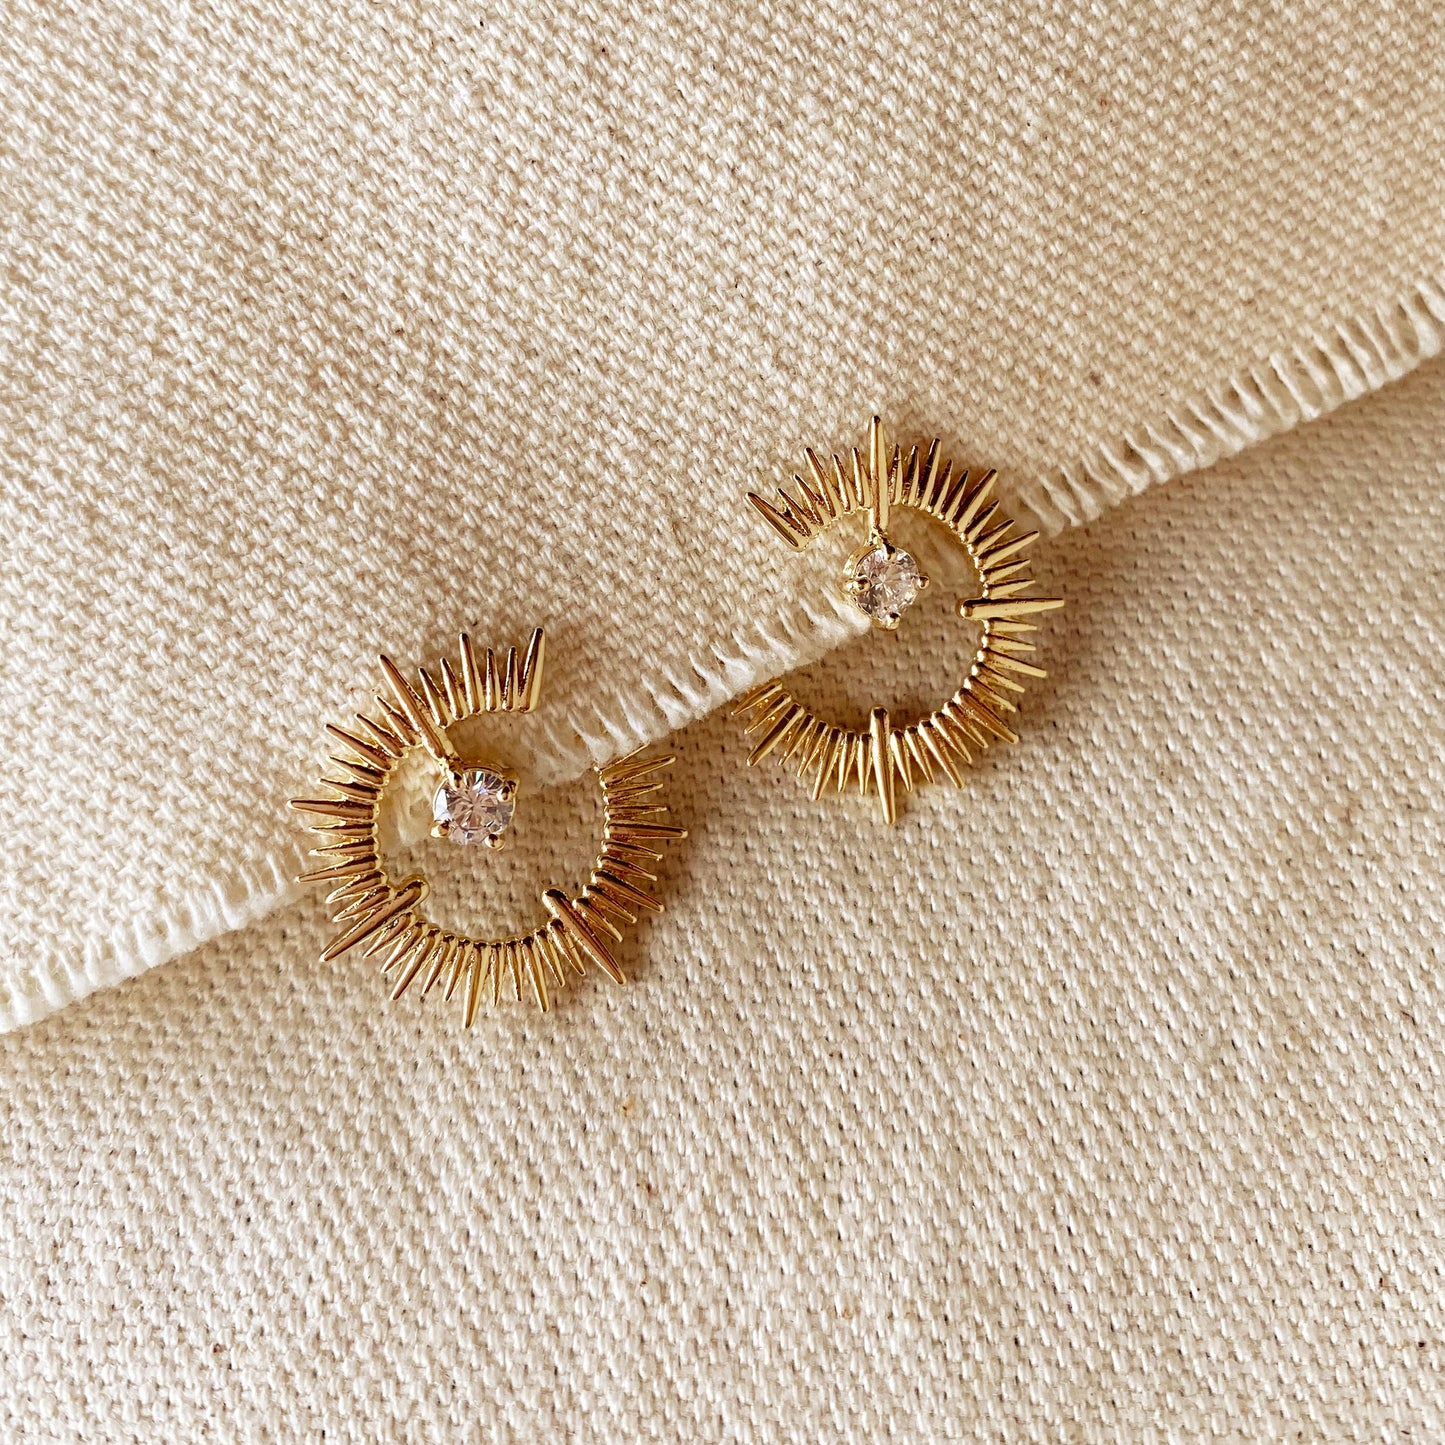 18K Gold Filled Spiked Stud With CZ